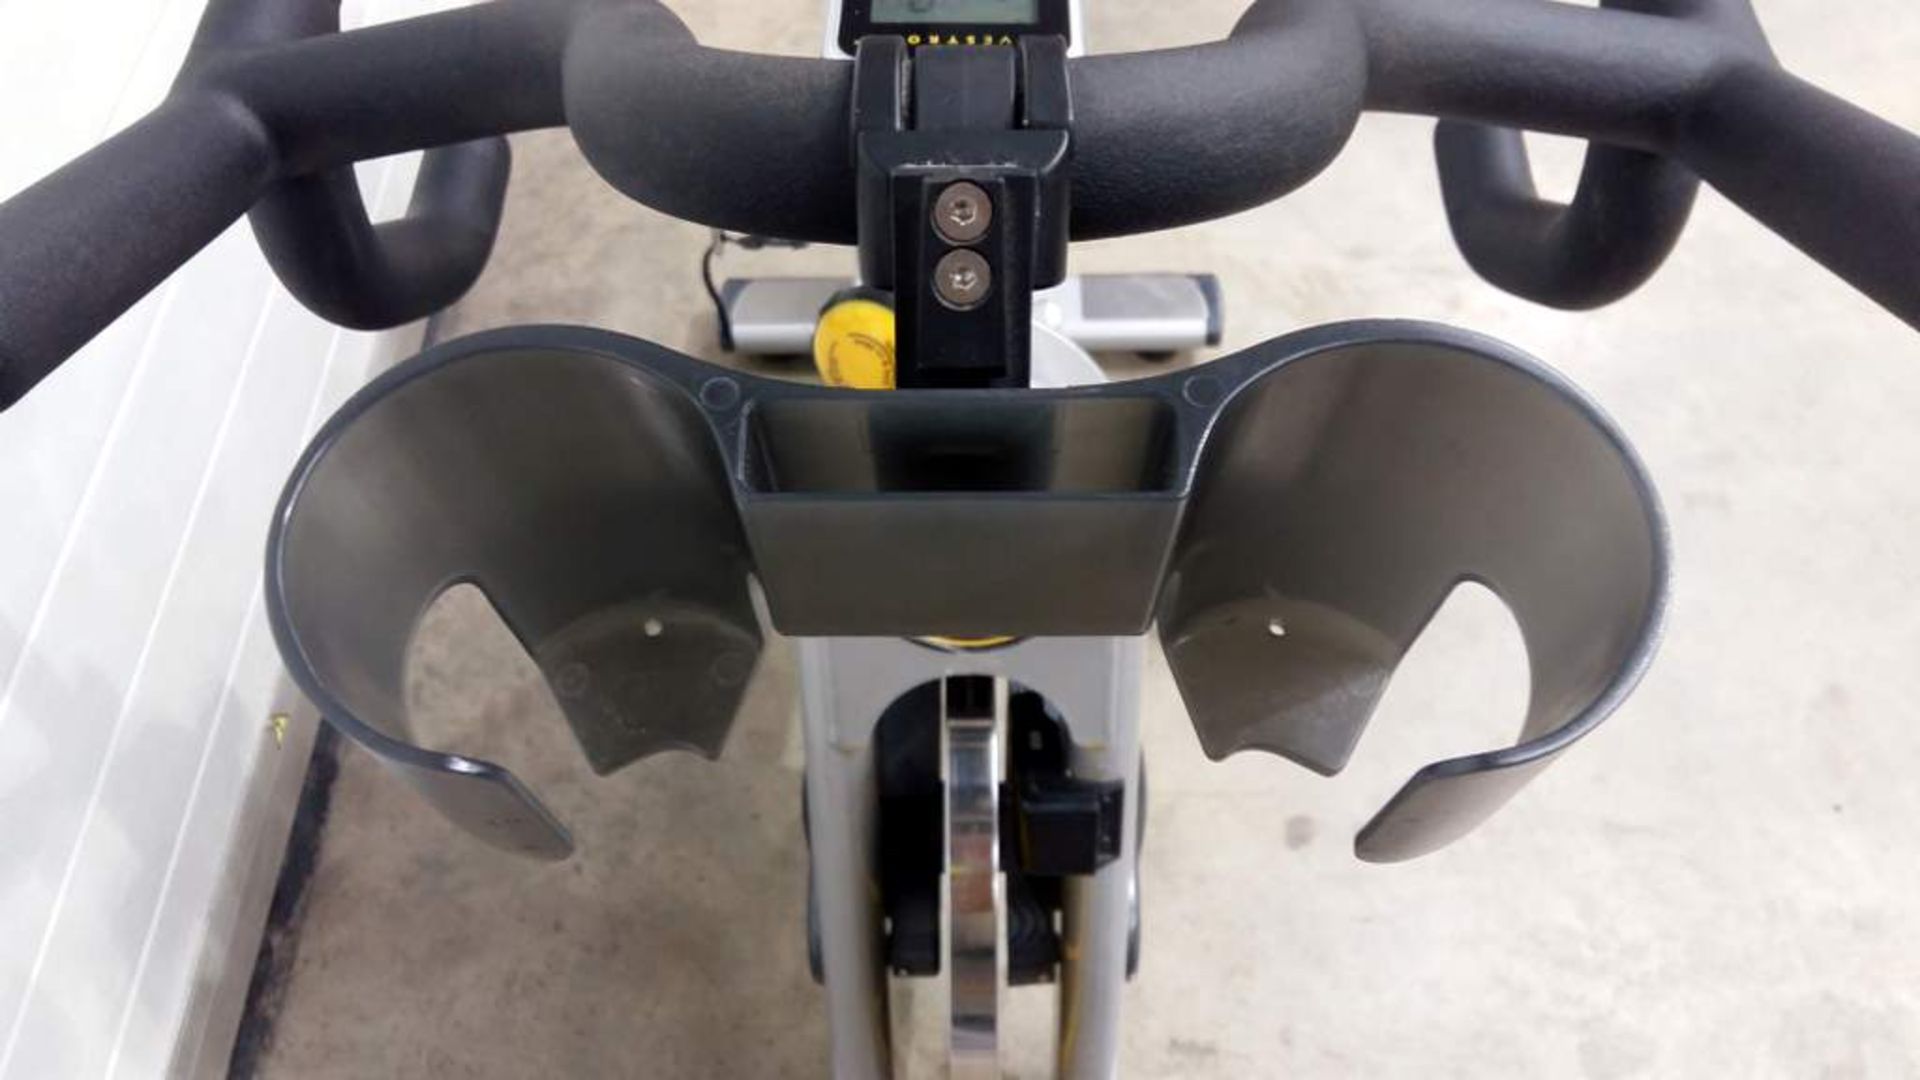 Matrix Livestrong S - Series indoor exersice bike - with LCD display console - Max user weight 130kg - Image 10 of 16